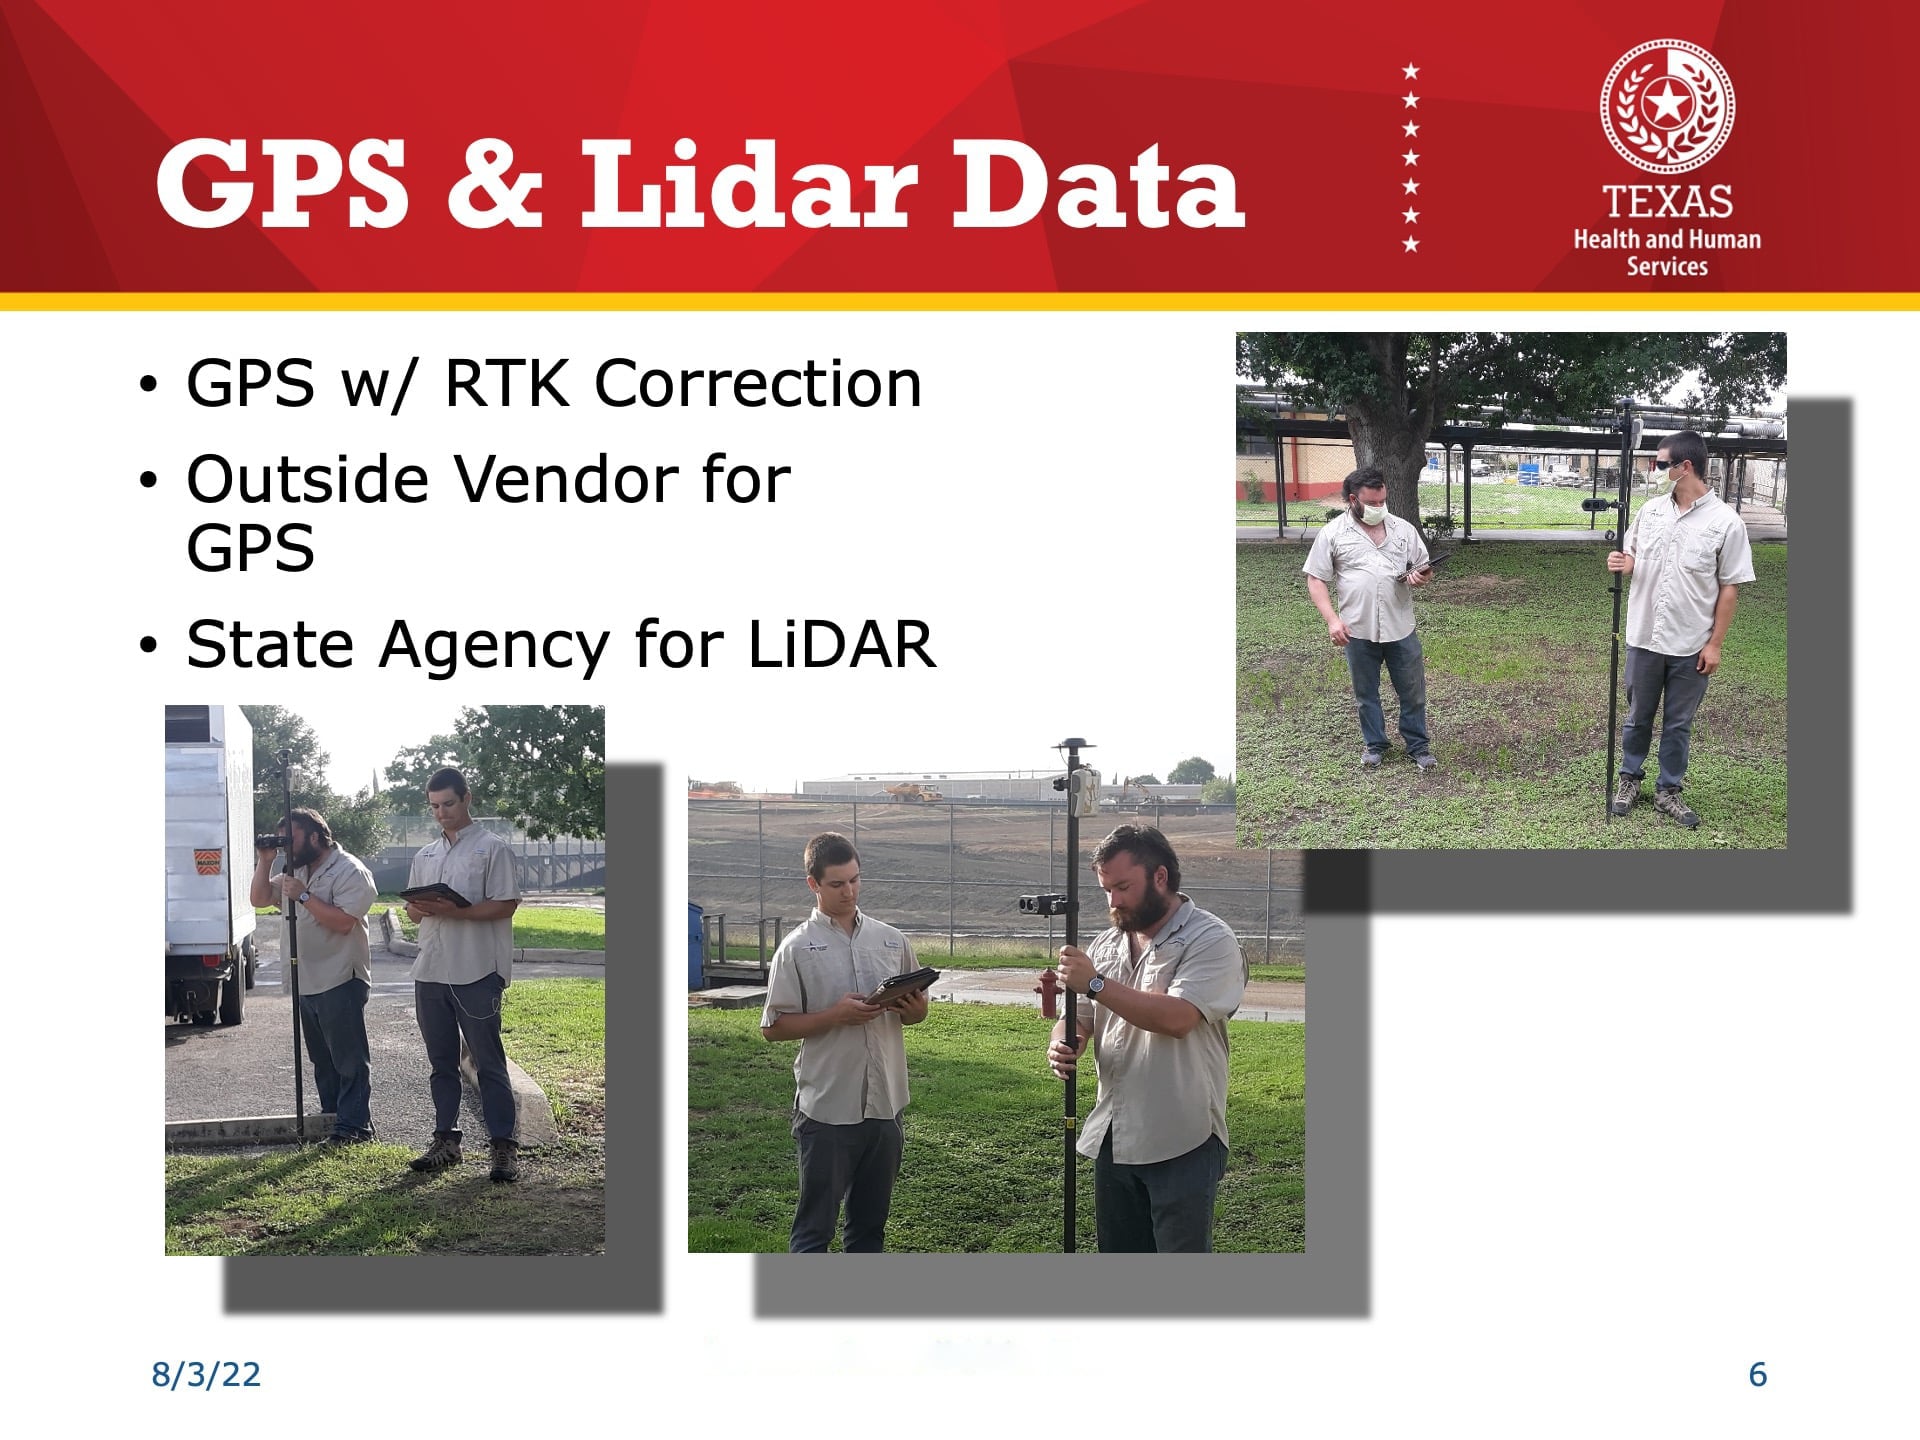 Esri UC 2022 Slide Reading: "GPS & Lidar Data." Bullet Points include: "GPS with RTK Correction, Outside Vendor for GPS, State Agency for LiDAR." Three photos show field crews with the survey equipment: the Eos Arrow Gold, Eos Laser Mapping Solution, and ArcGIS Field Maps.